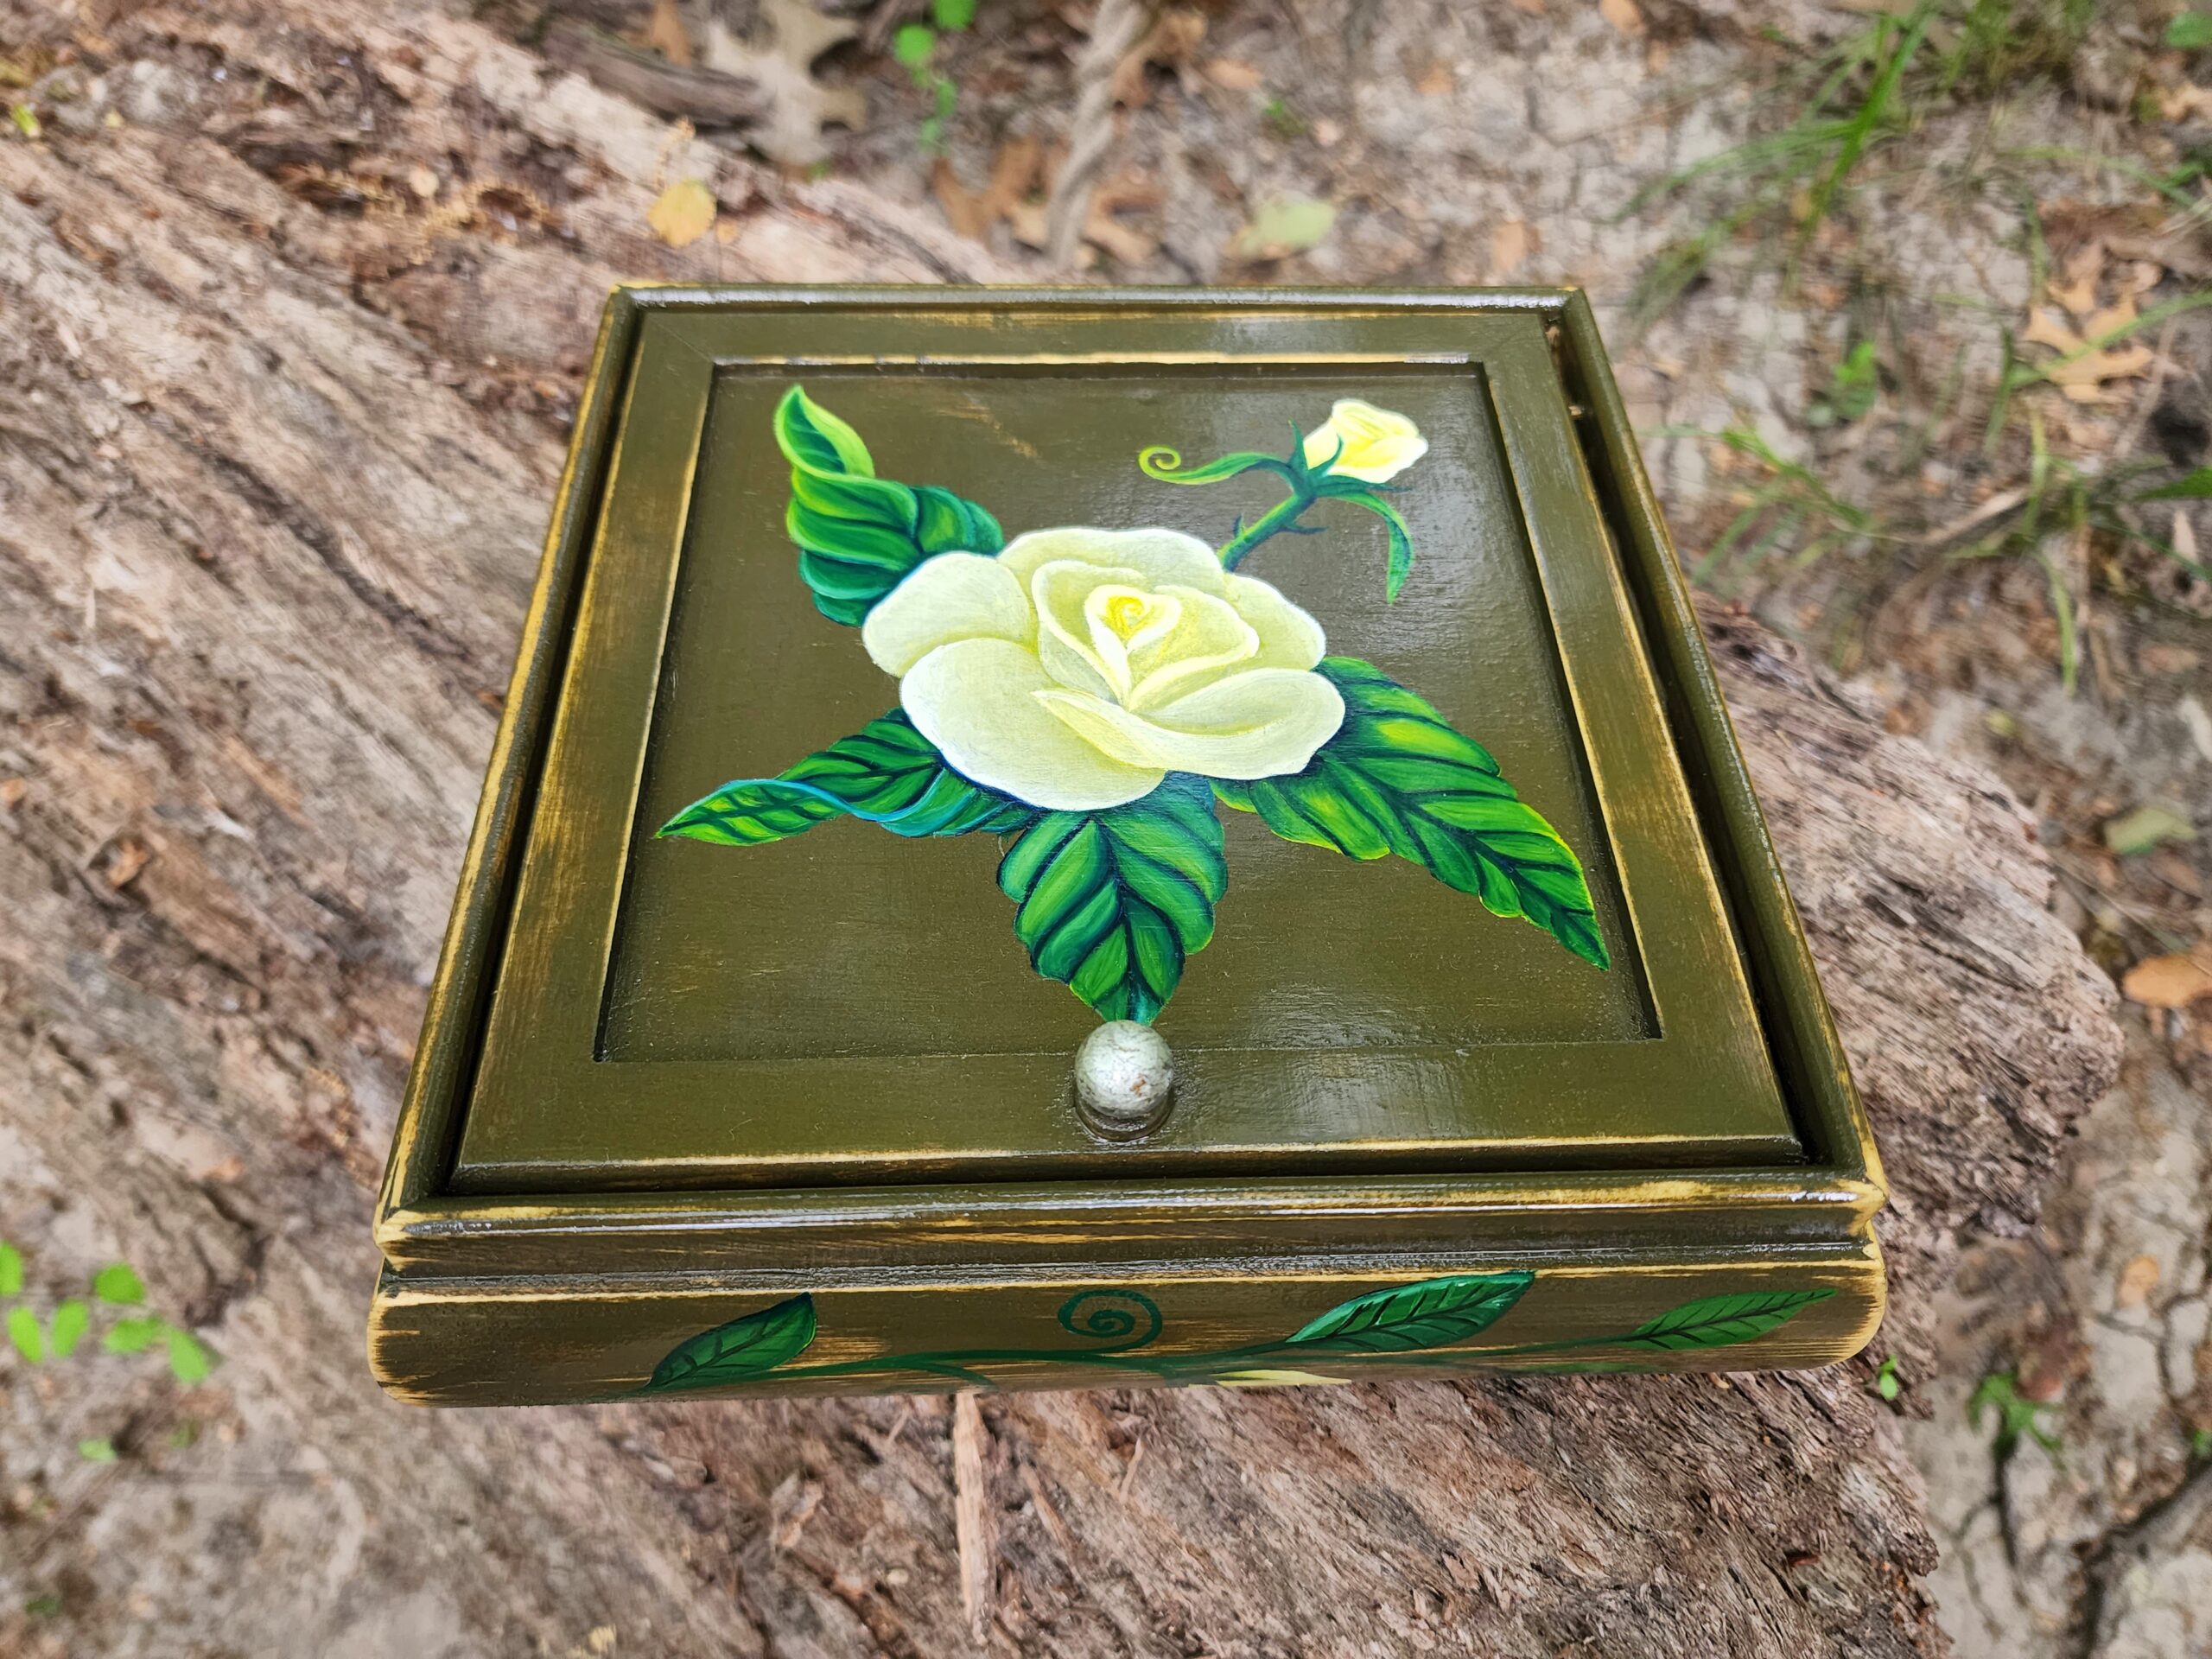 Beautiful handpainted wood trinket box with a mirror and a covered silver leaf handle. This cute trinket box is an ideal gift for a special beloved one. You can store jewelry such as rings, necklaces, bracelets, or anything you would like to keep in a particular place, especially in this elegant and artistic trinket box.